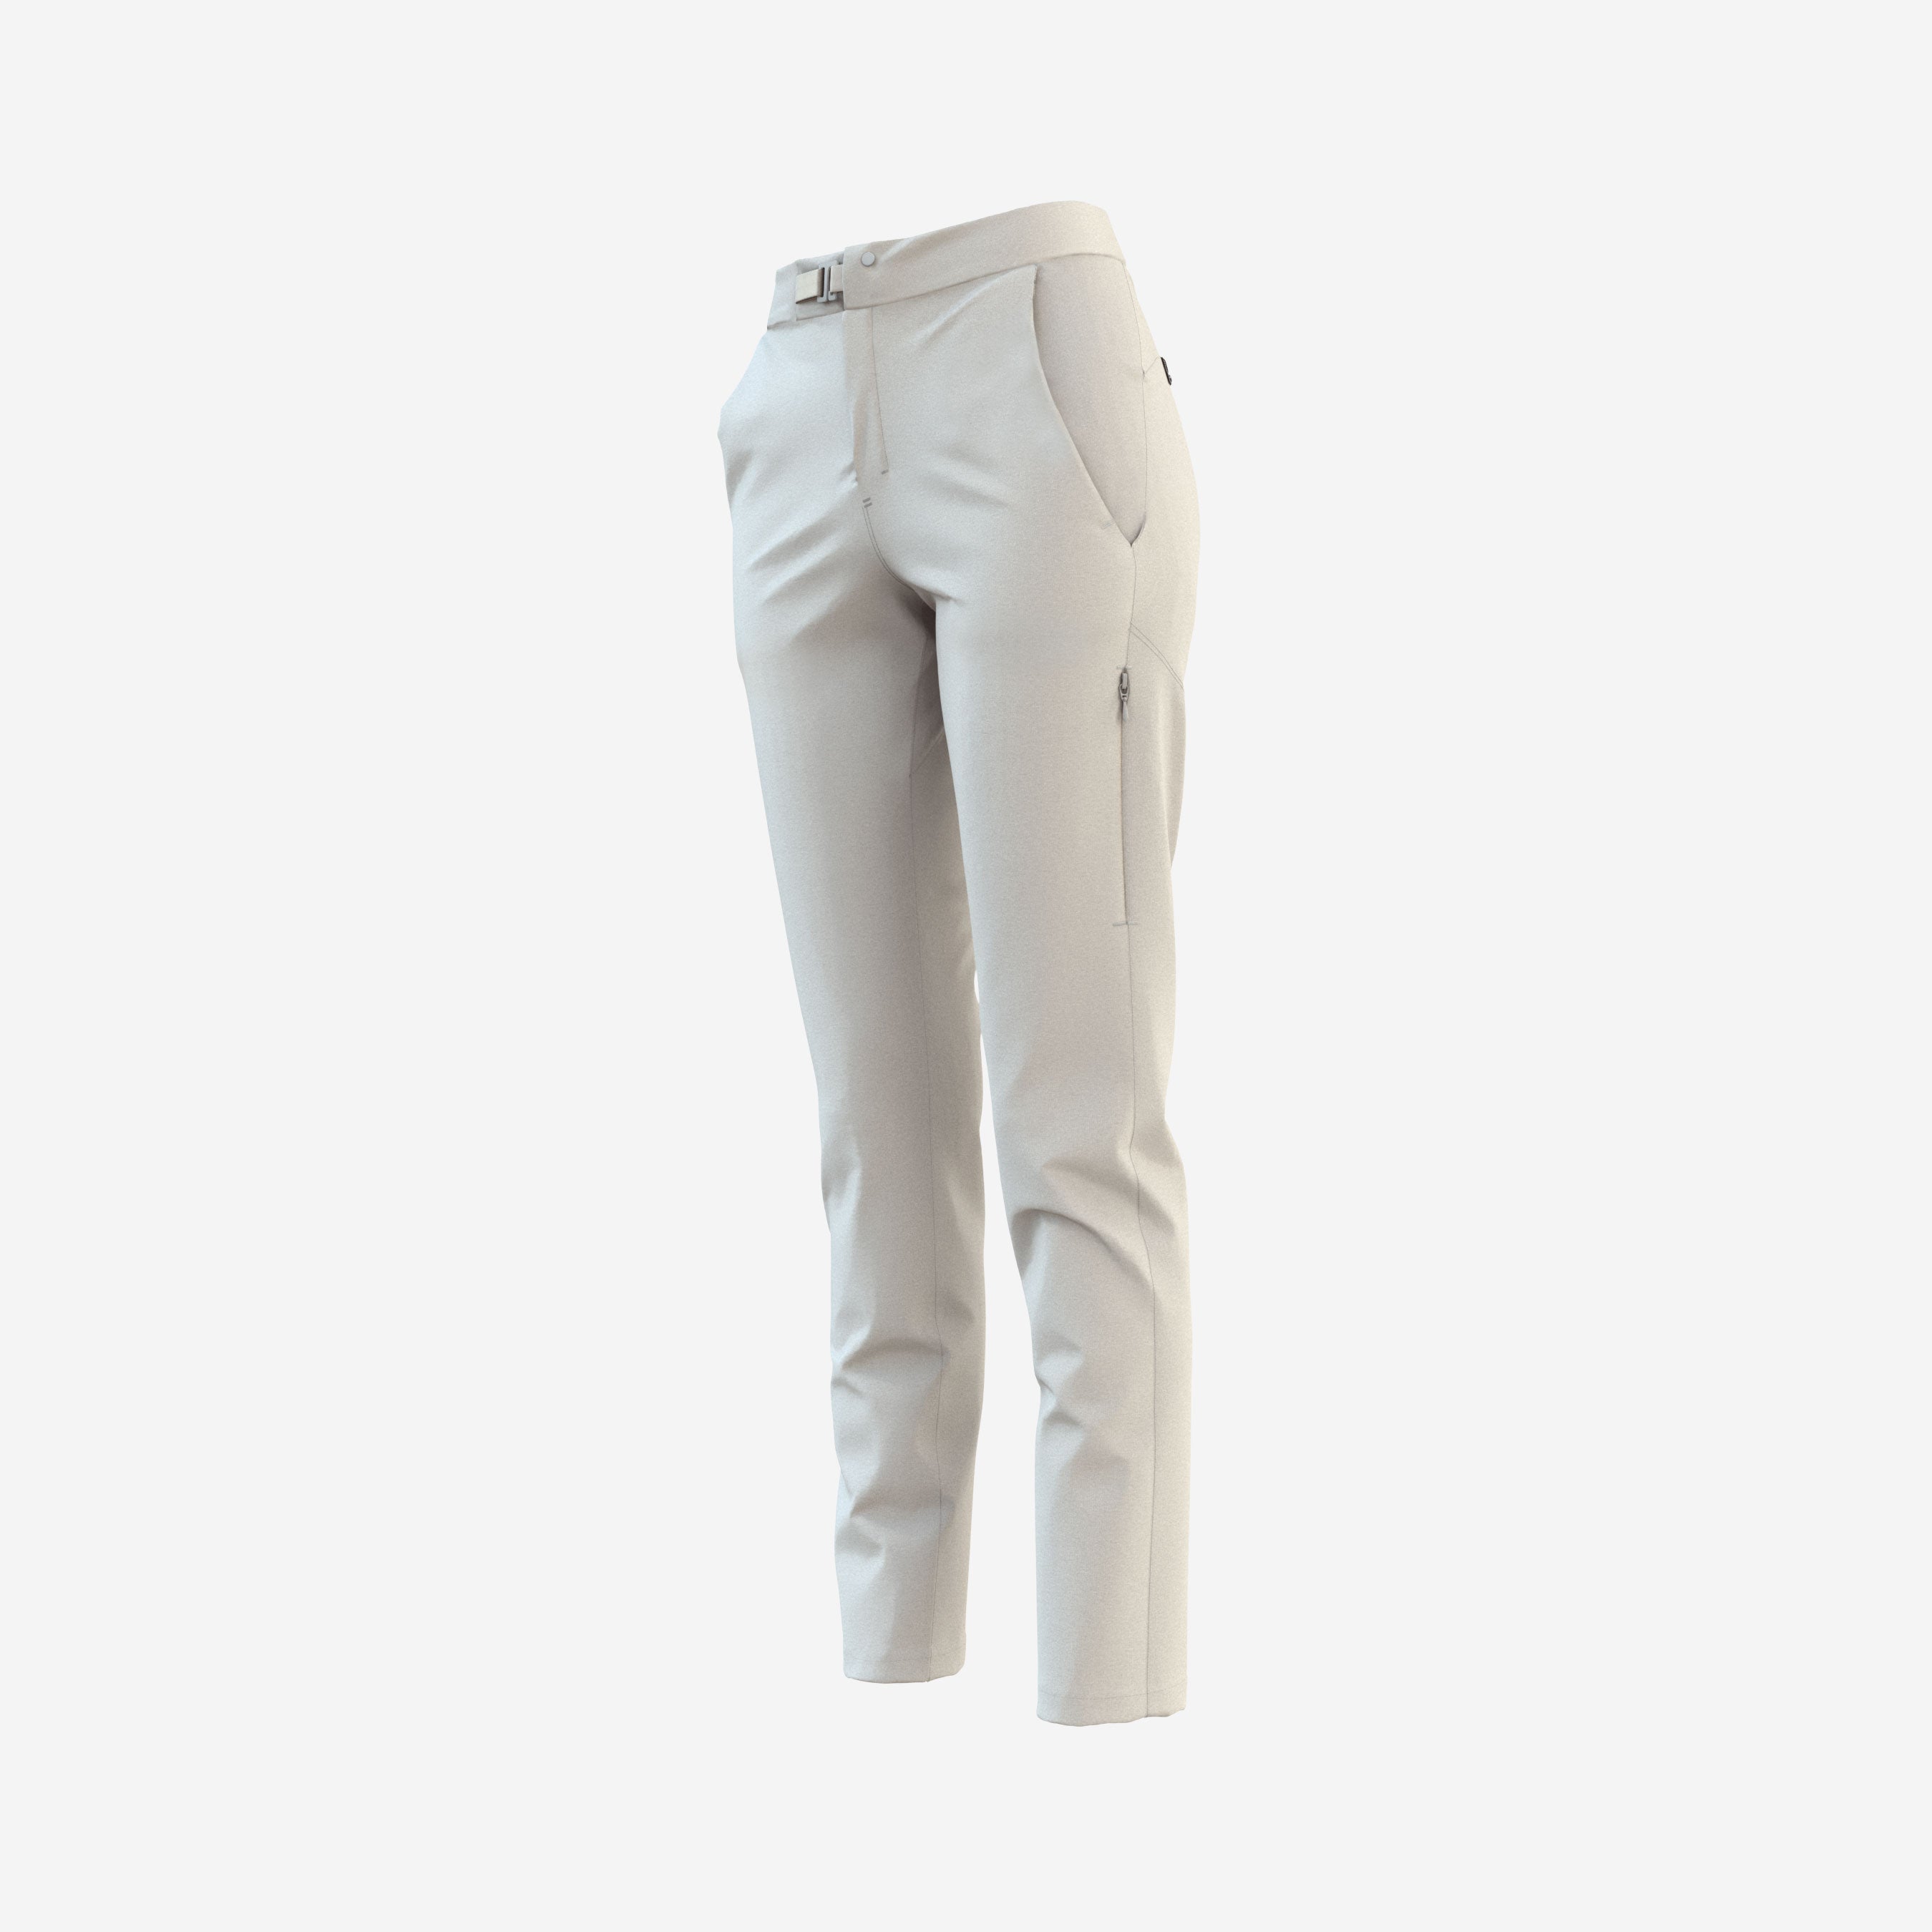 Diffuse Women's Pant